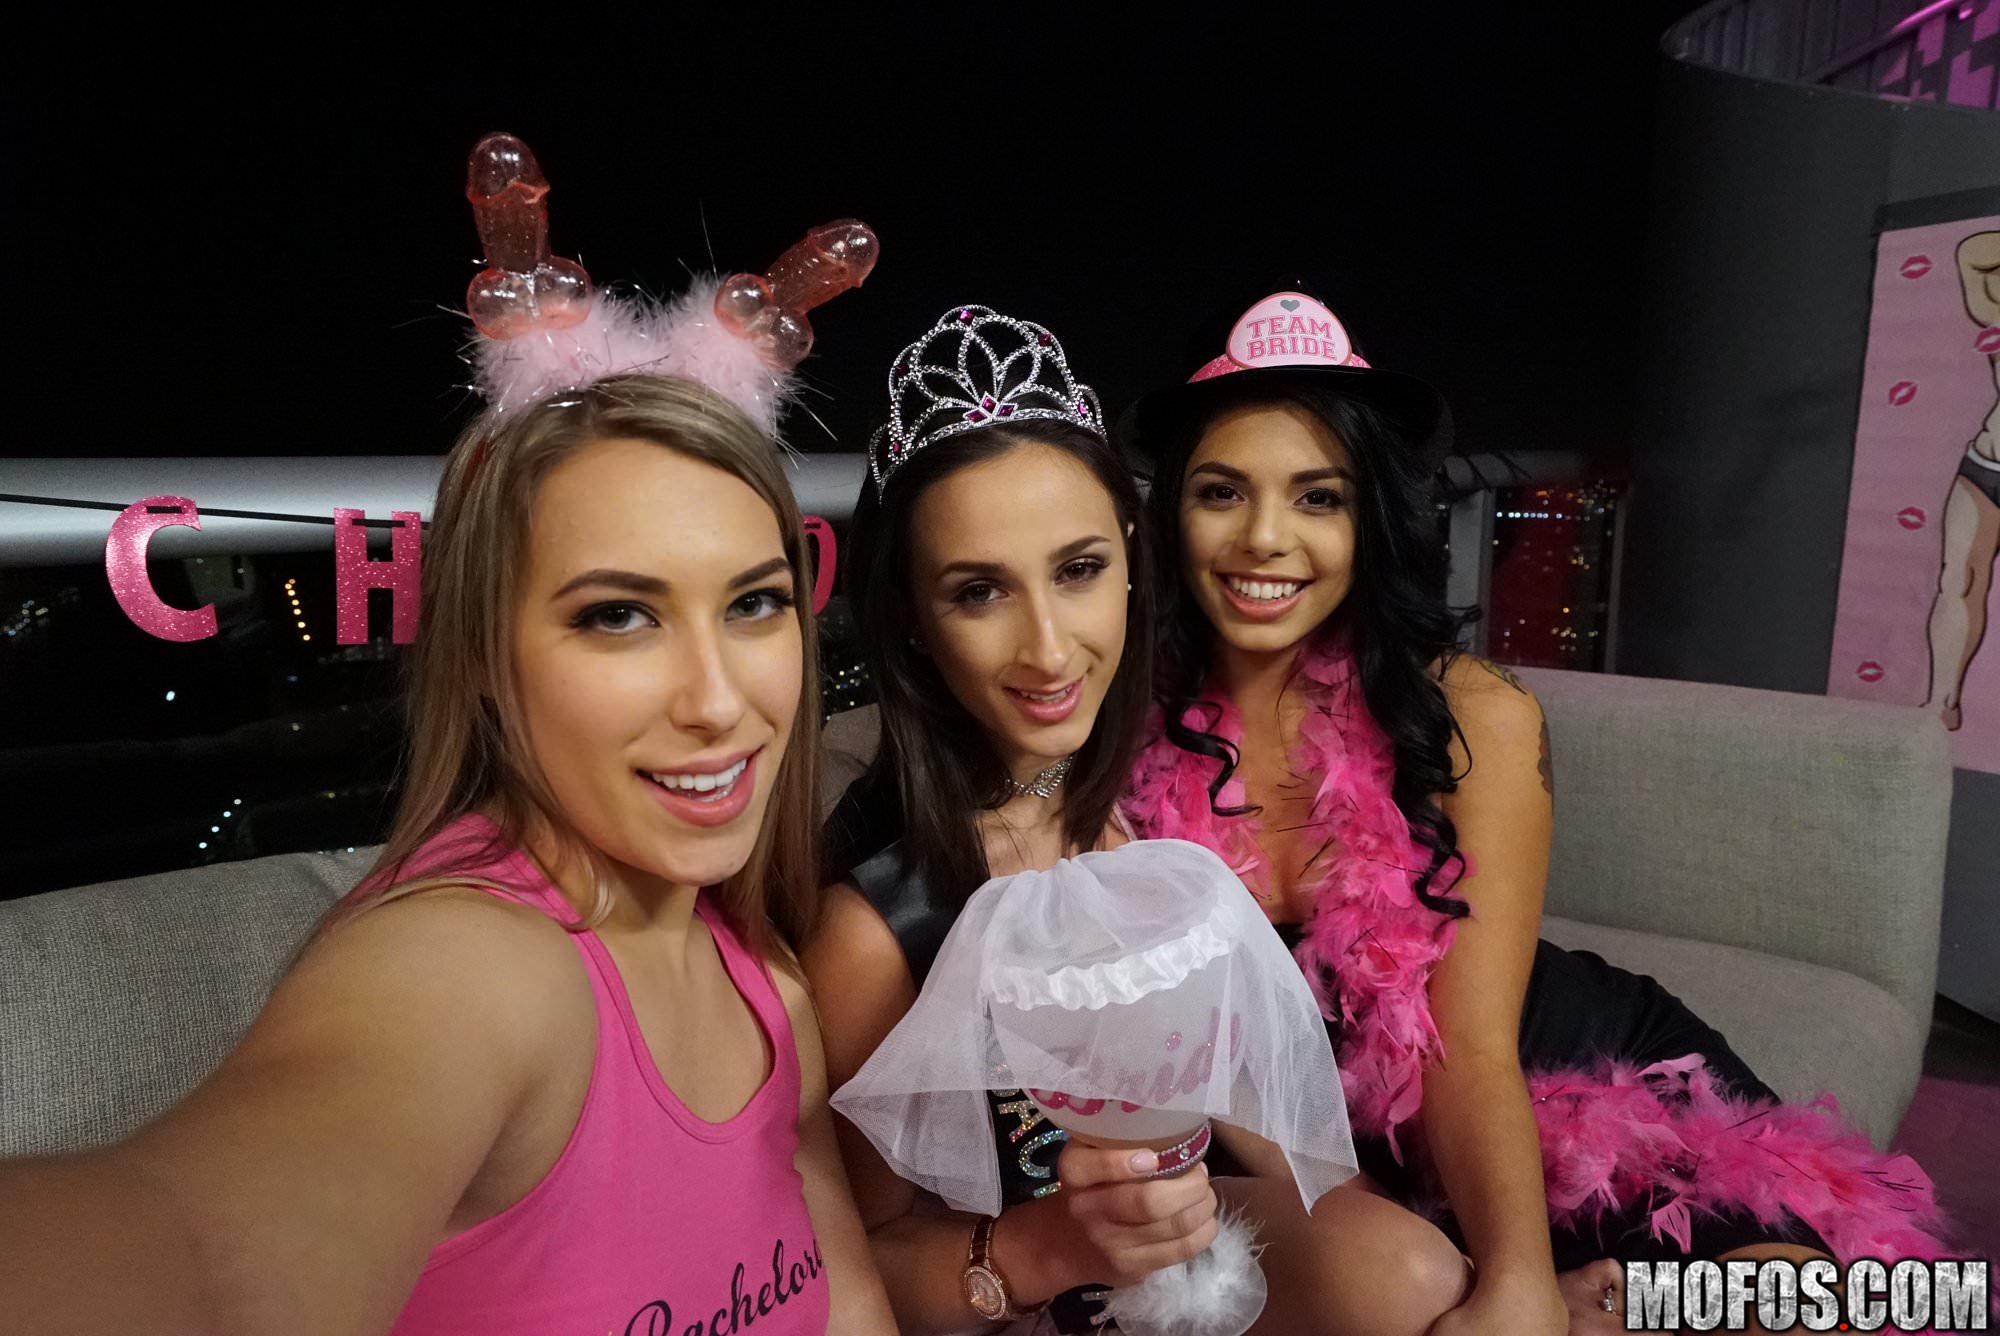 Bachelorette party threesome with Gina and Ashley